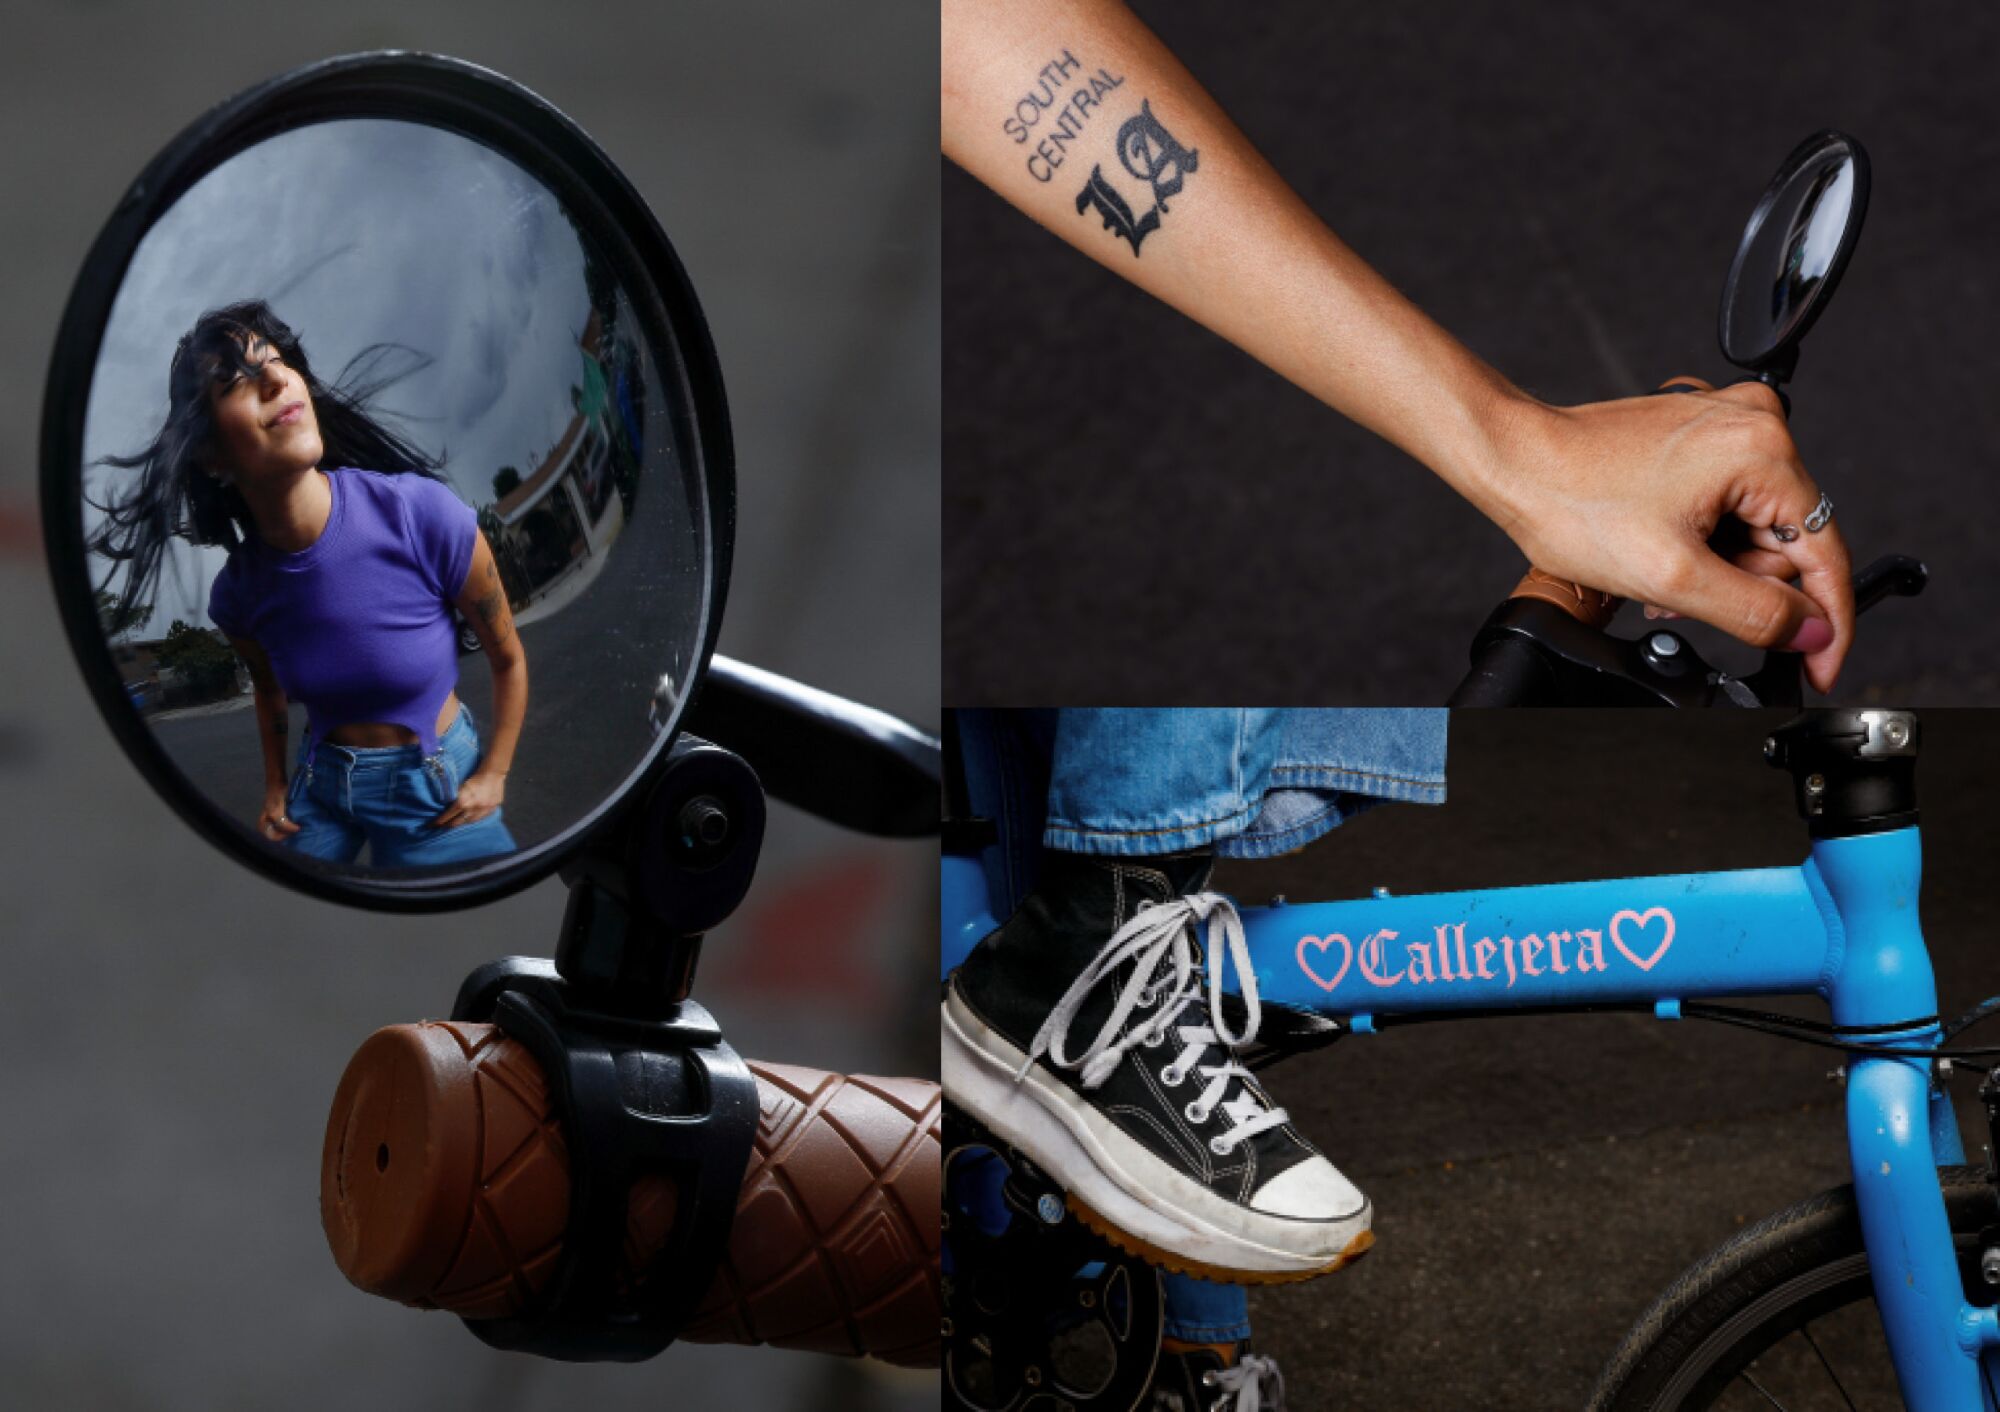 Three arranged photos of Michelle Moro, her arm with her tattoo and her sneaker foot on the pedal of her bike.